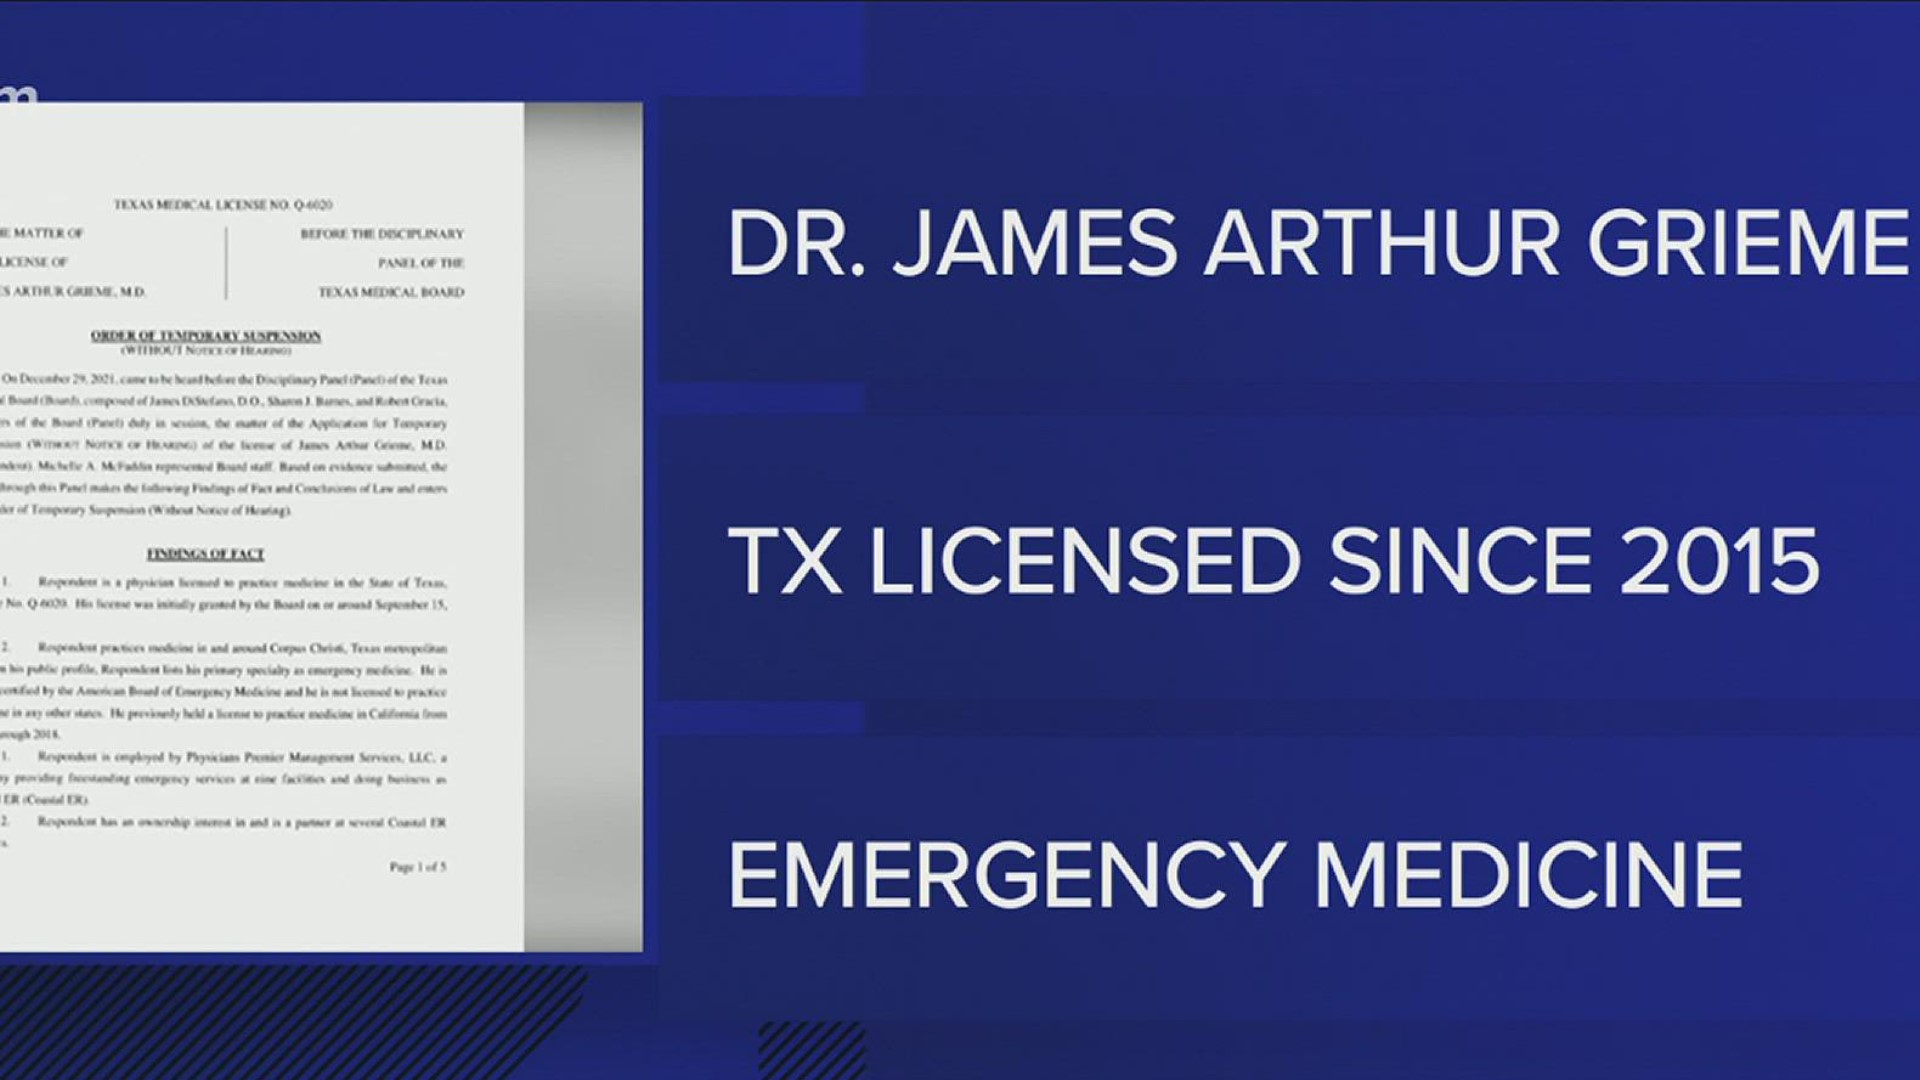 Dr. James Arthur Grieme was placed on a 14 day precautionary suspension, which was extended by another 14 when was scheduled to undergo a drug screening.